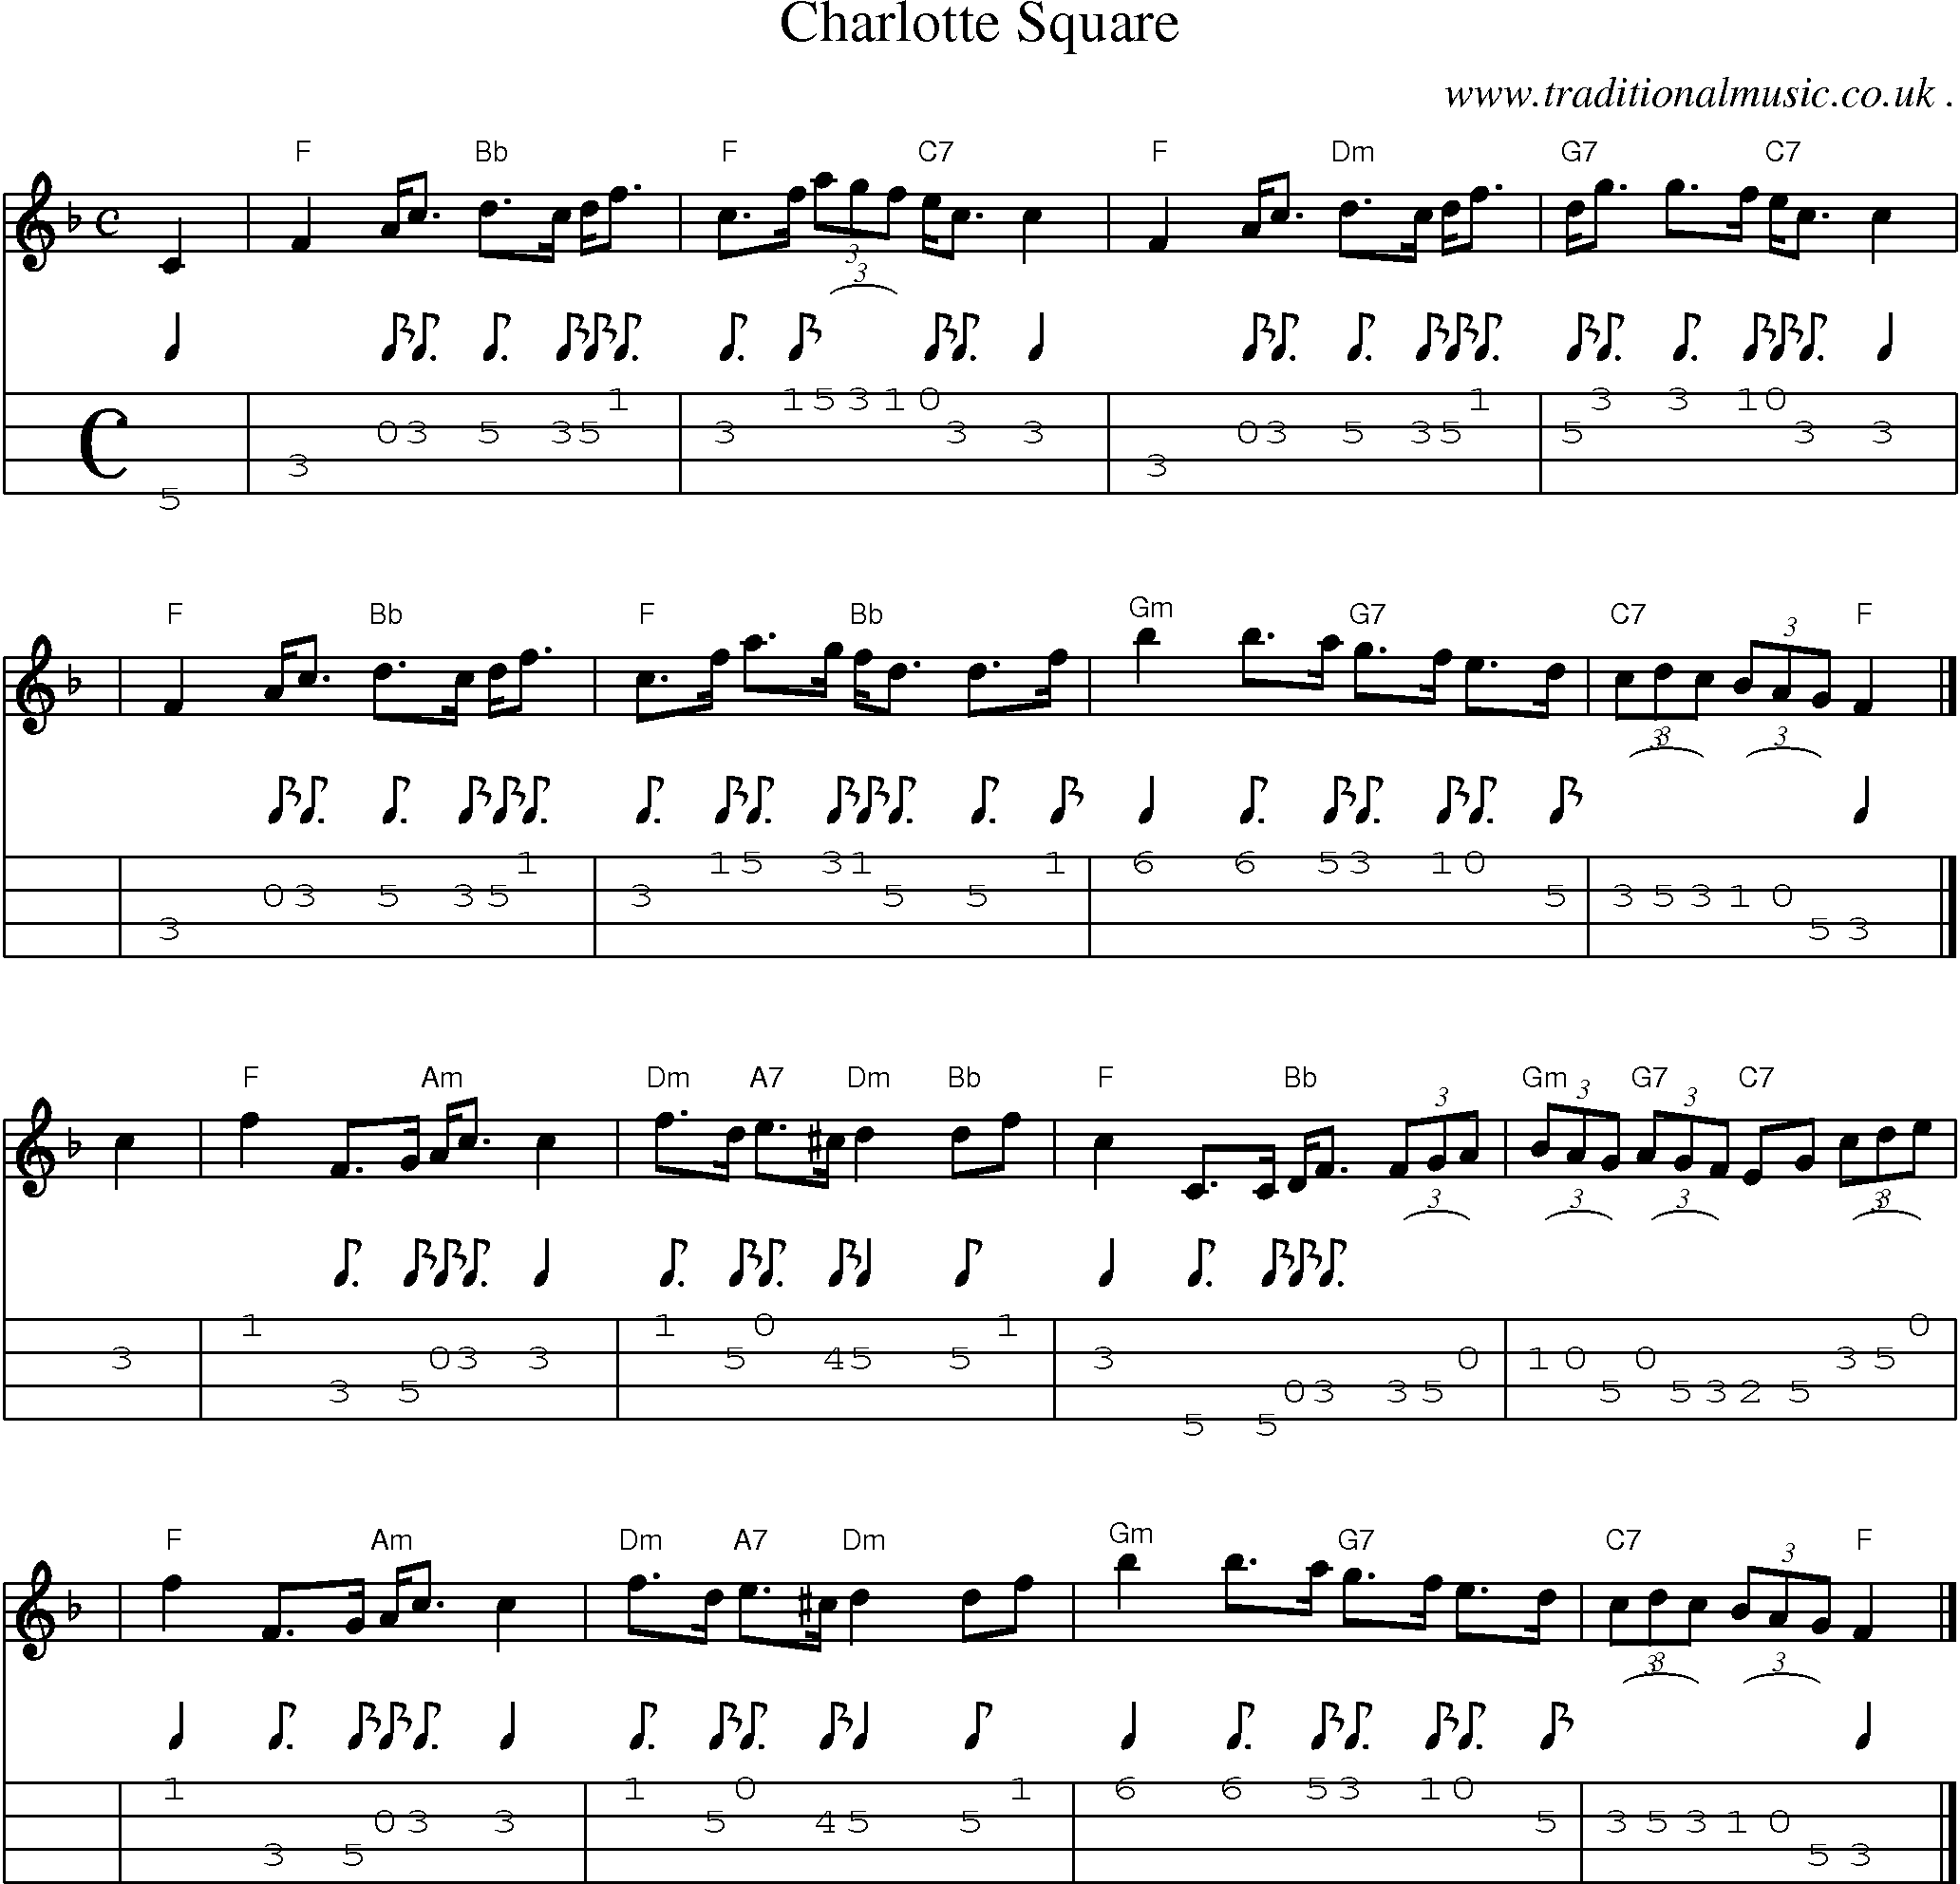 Sheet-music  score, Chords and Mandolin Tabs for Charlotte Square